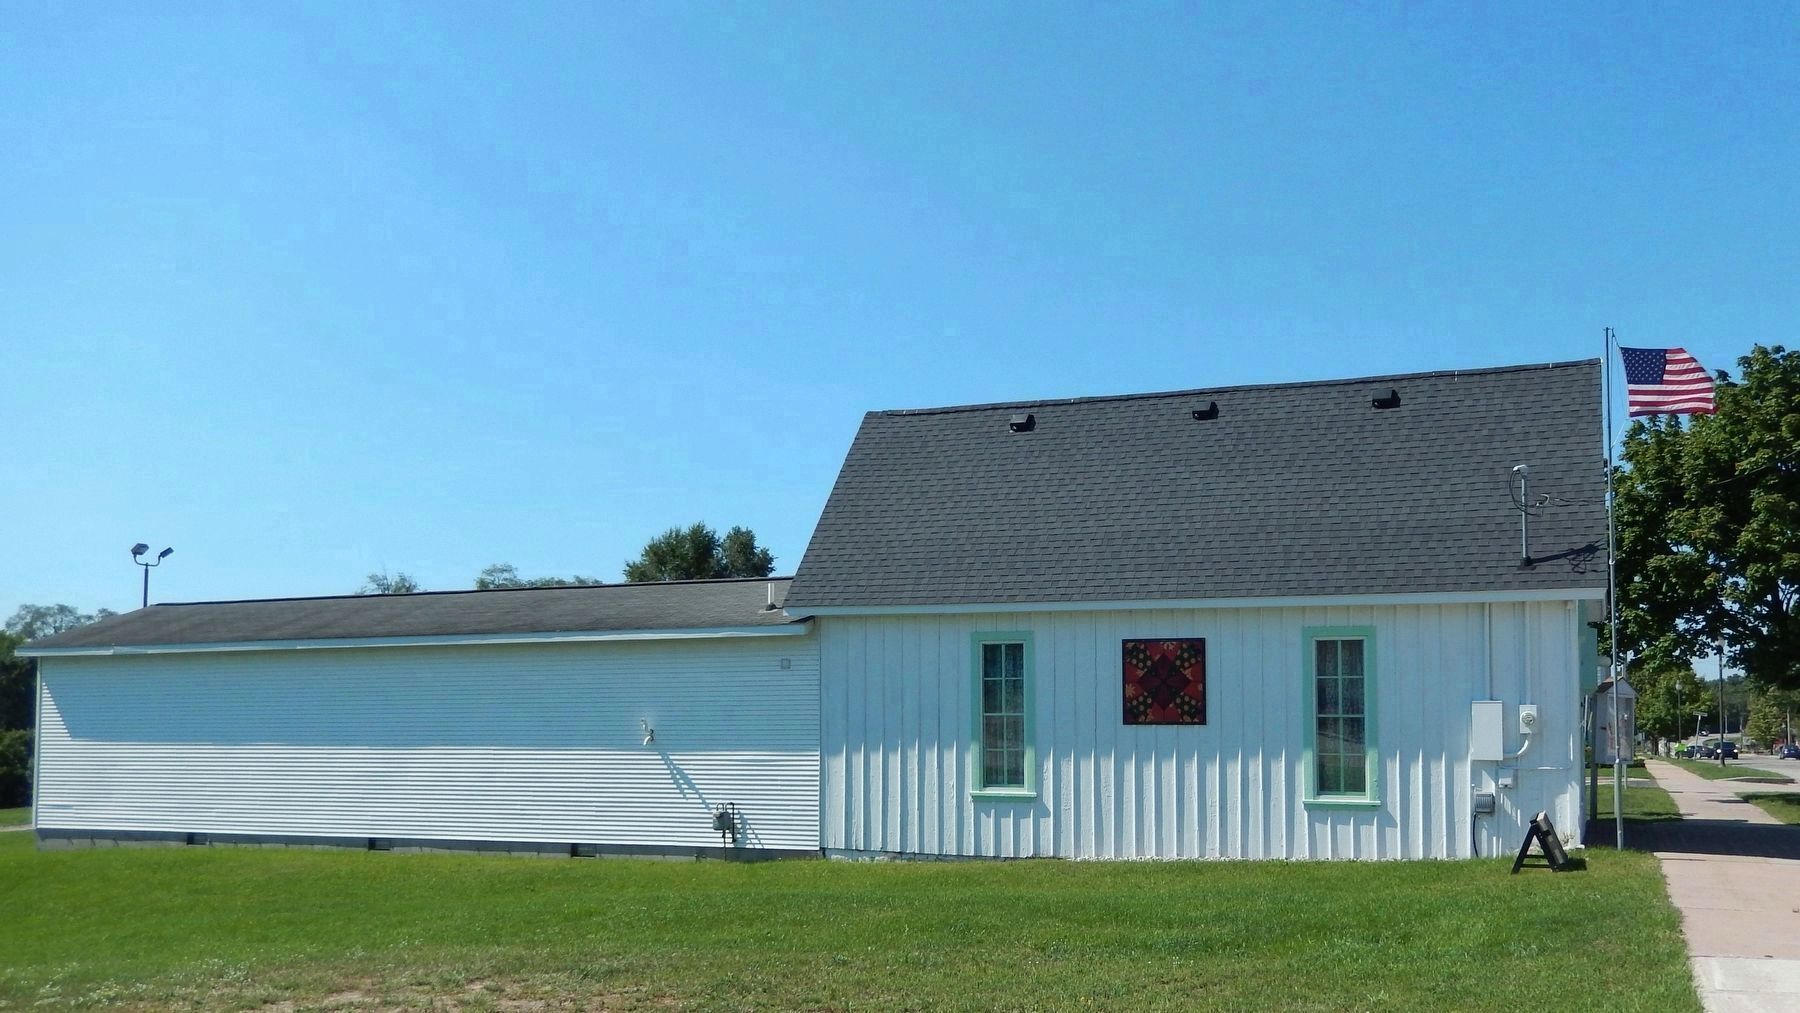 Farwell Area Historical Museum (<i>east elevation</i>) image. Click for full size.